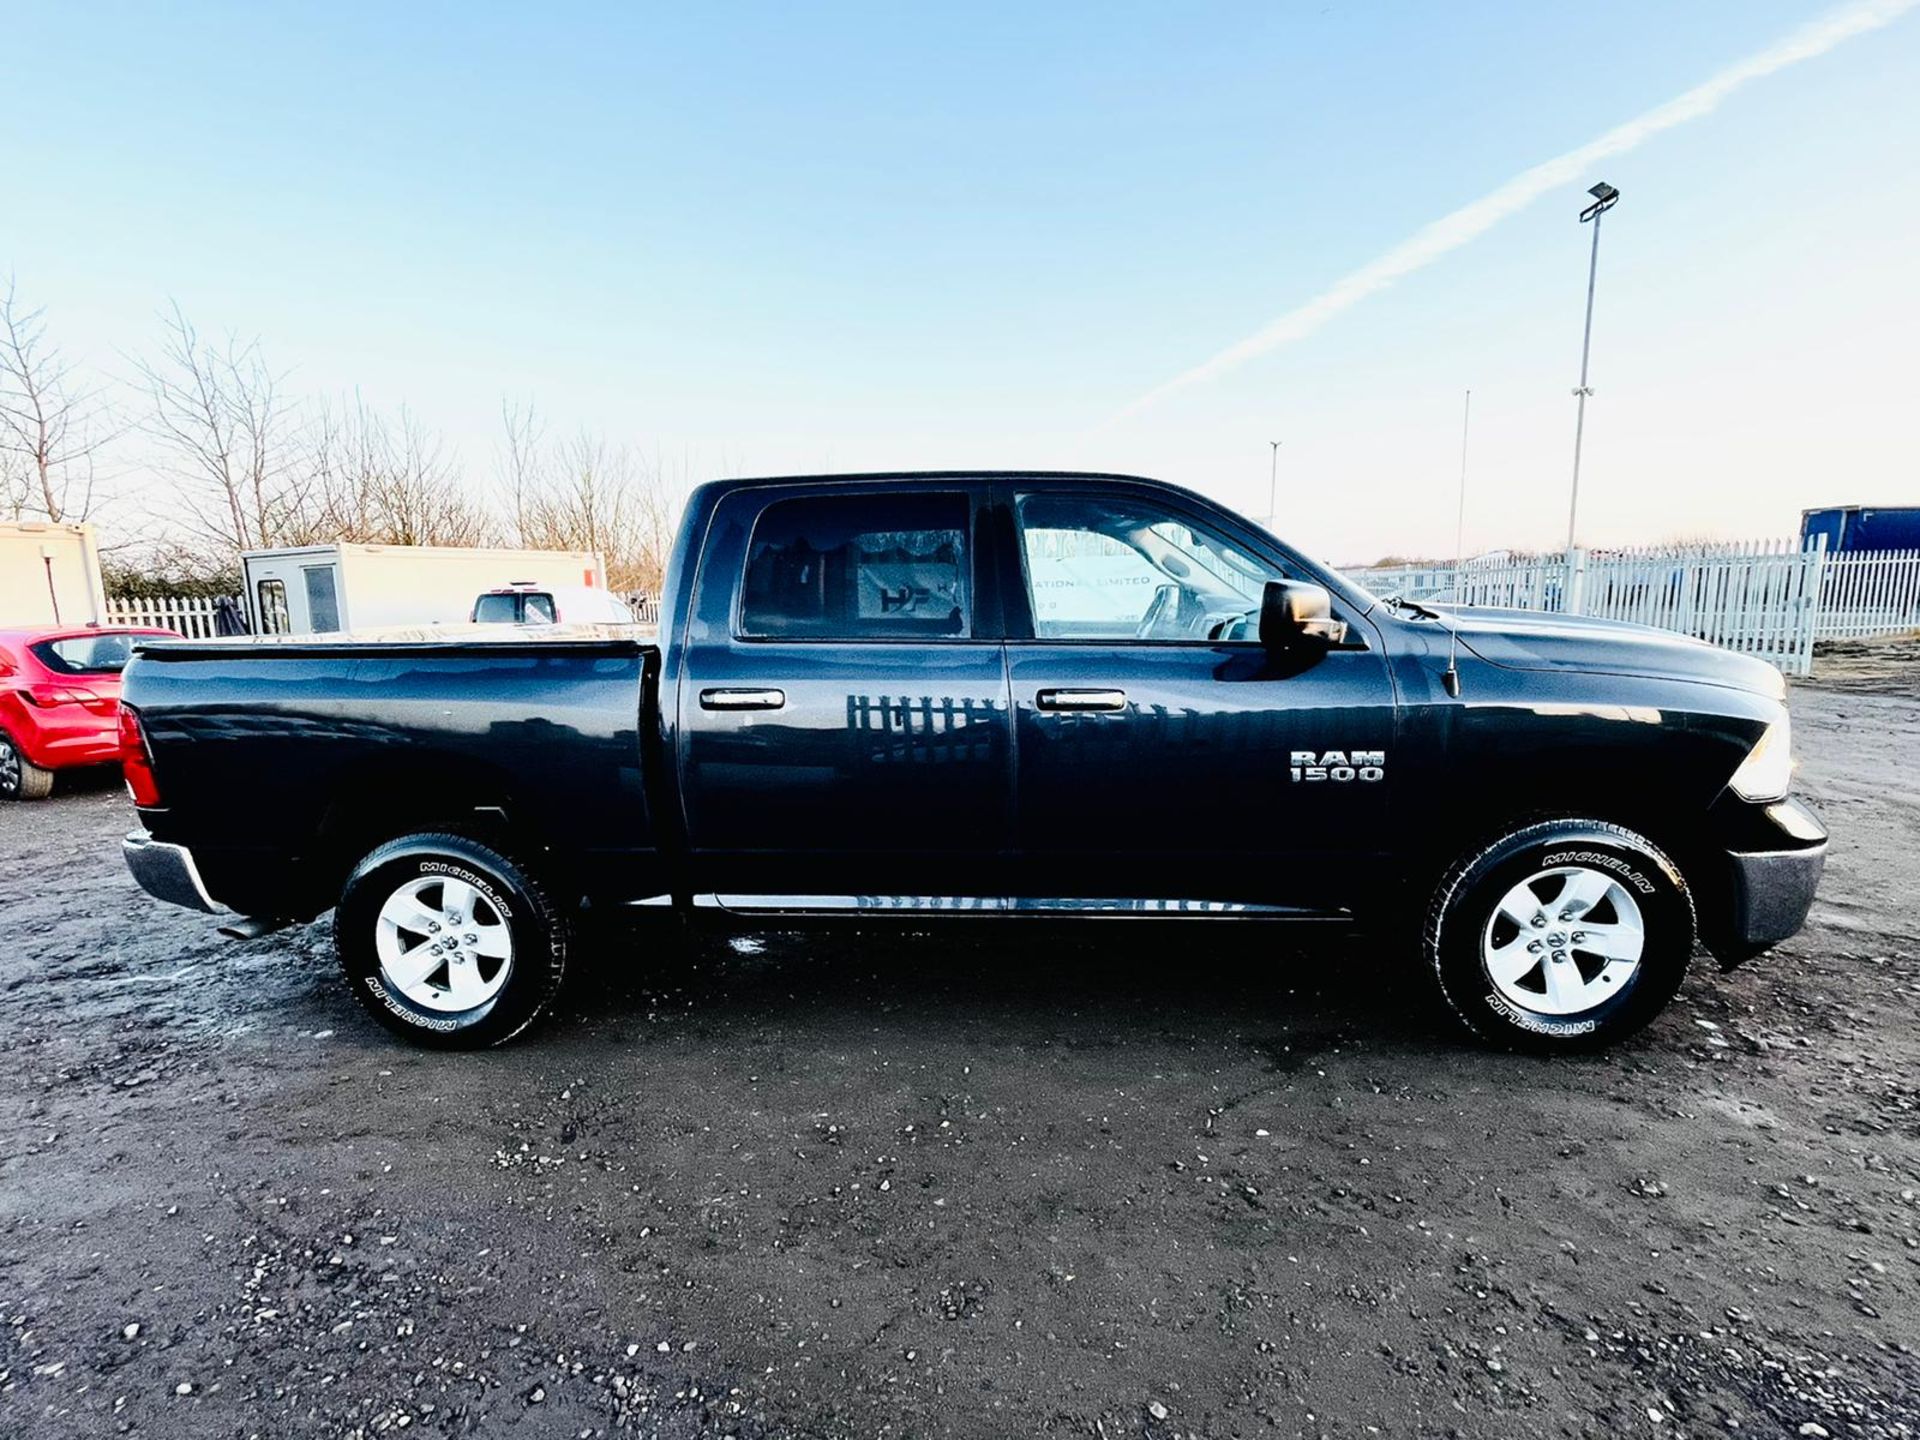 ** ON SALE ** Dodge Ram 3.6L V6 1500 Crew Cab SLT ' 2015 Year ' A/C - 6 Seats - Chrome Package - Image 16 of 31